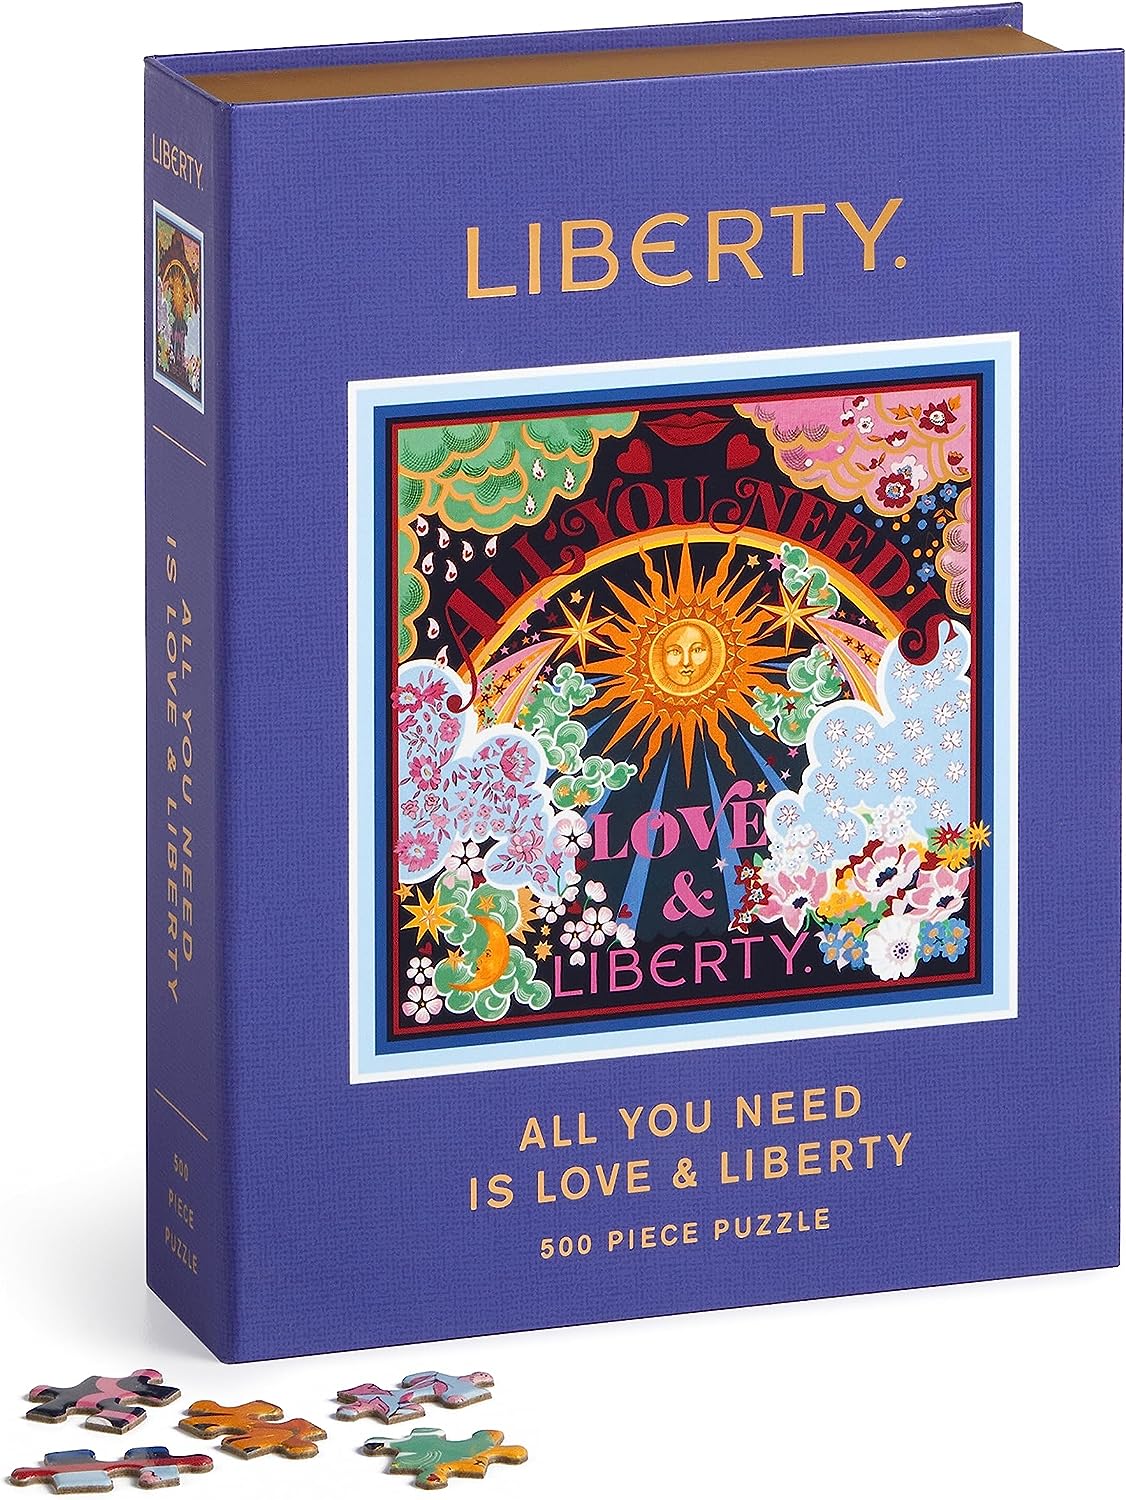 All You Need is Love 500 Piece Book Puzzle